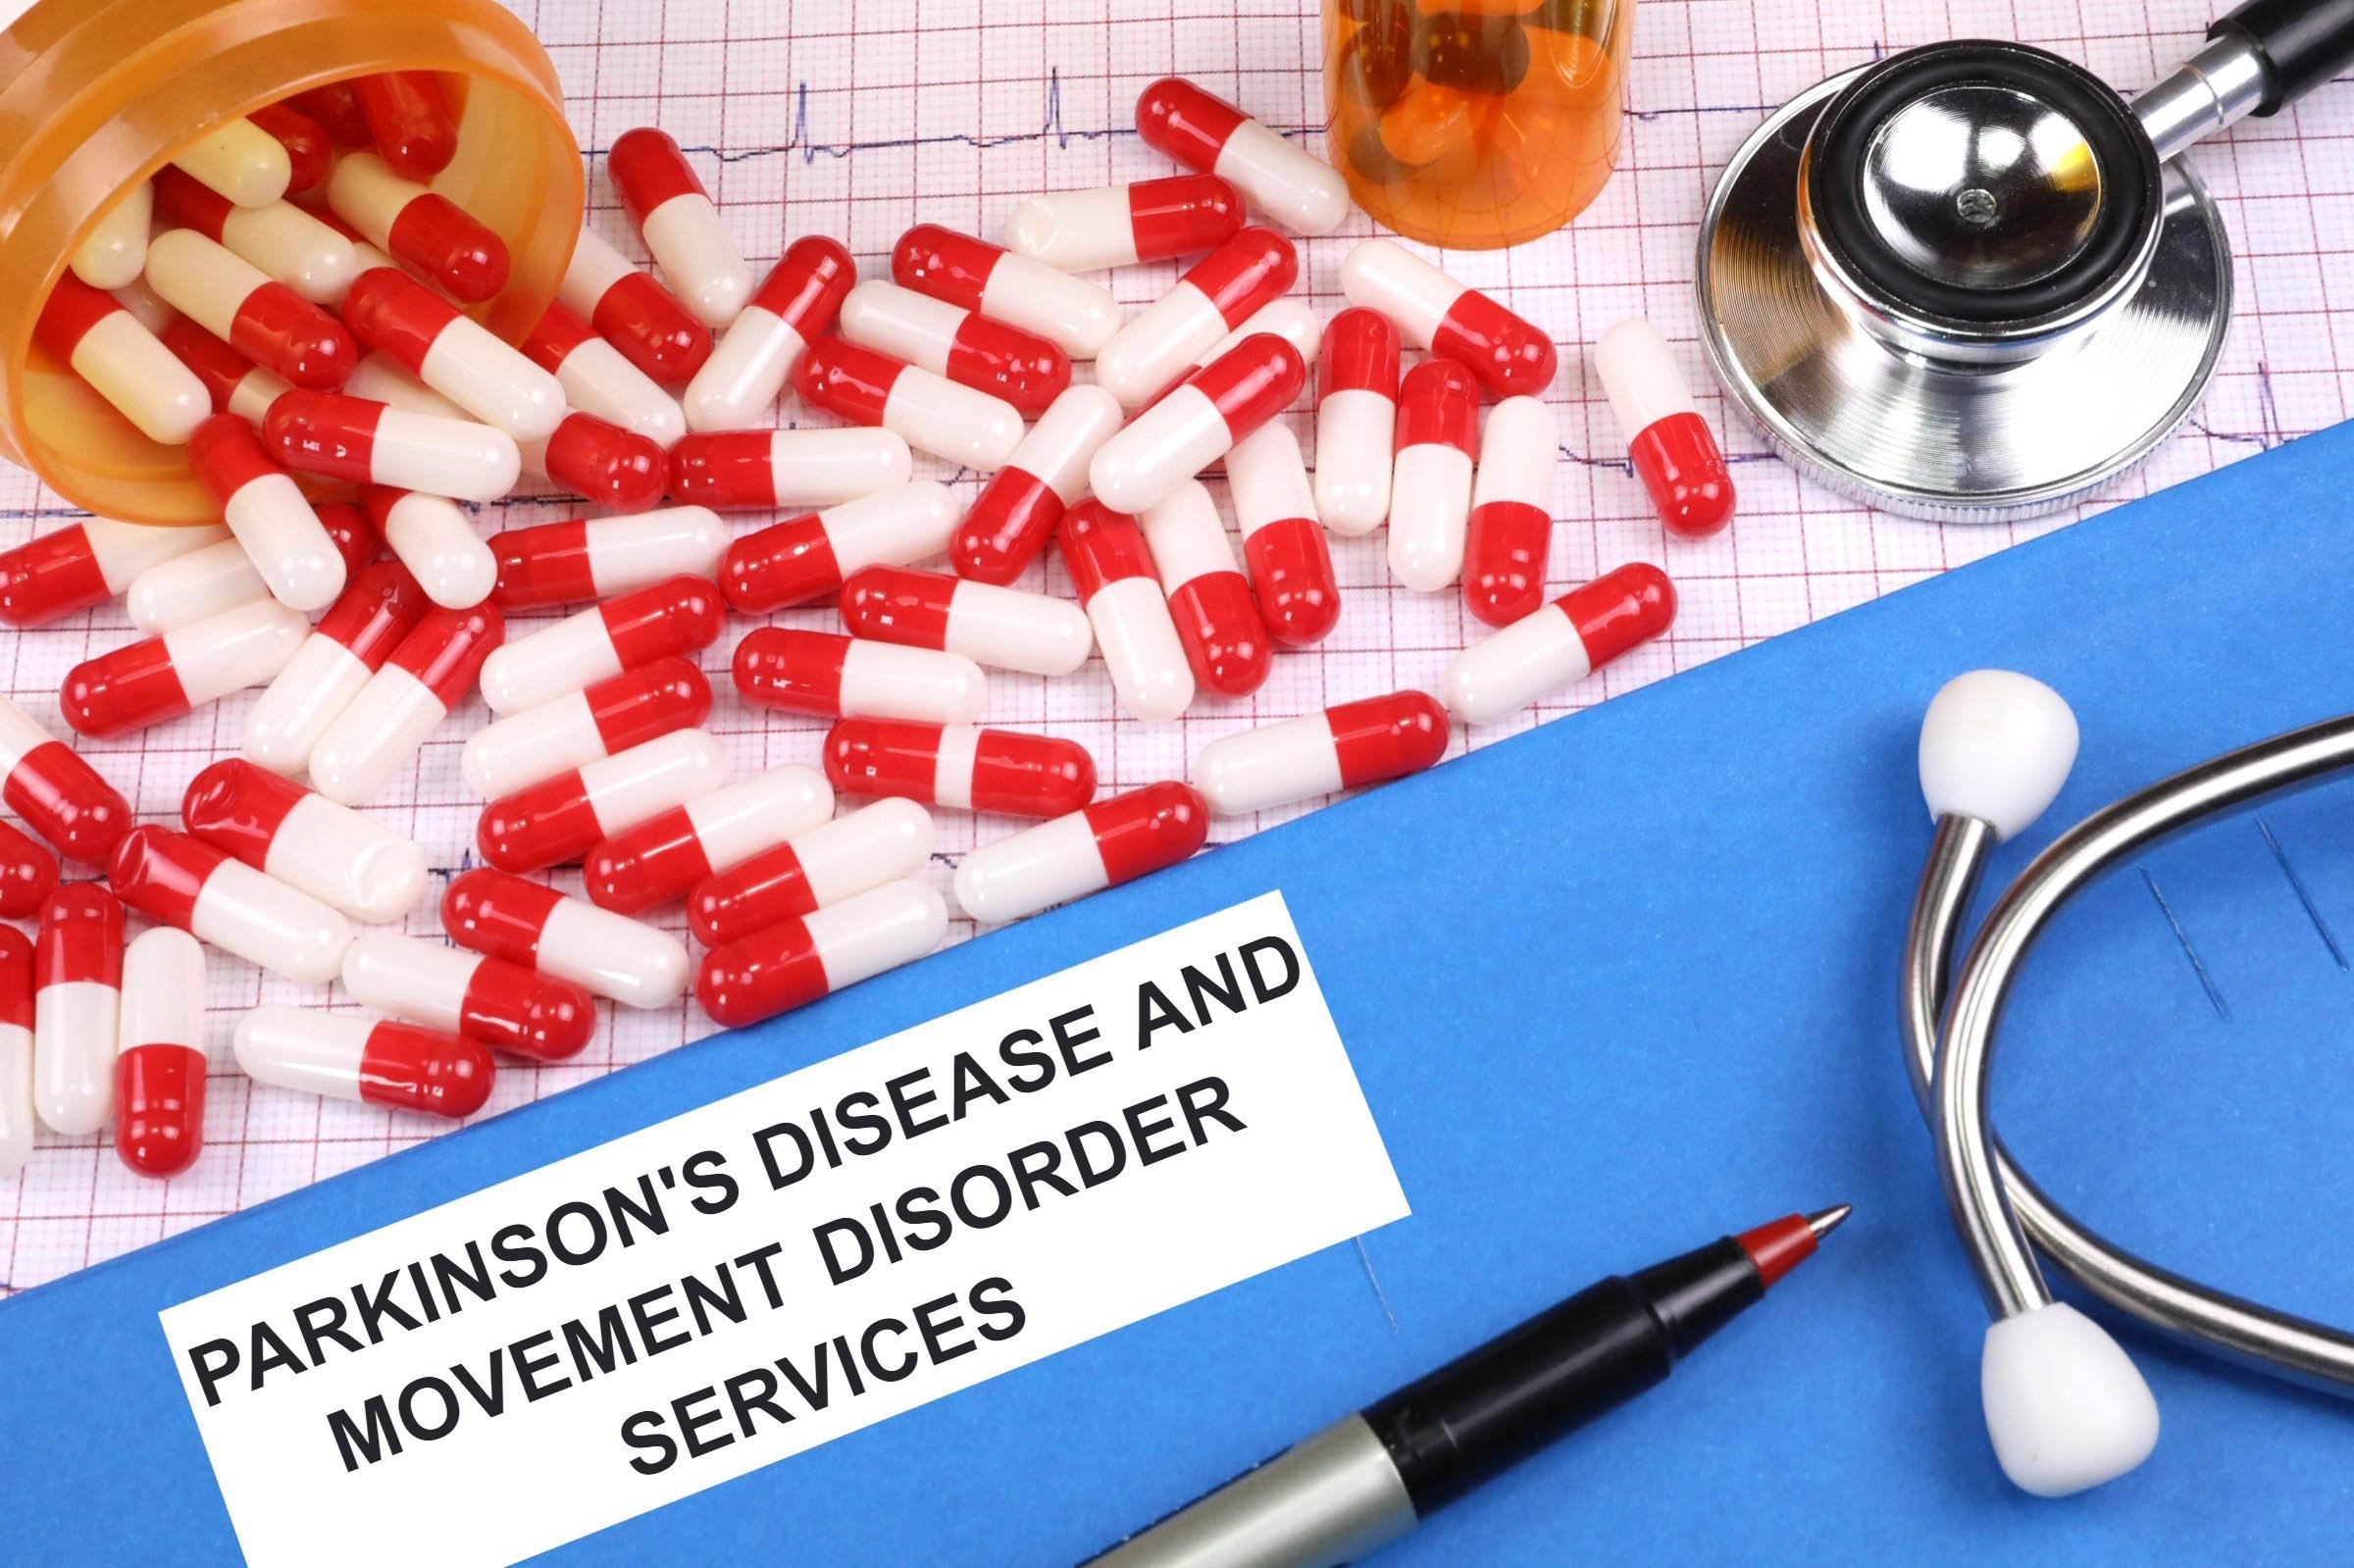 parkinsons disease and movement disorder services